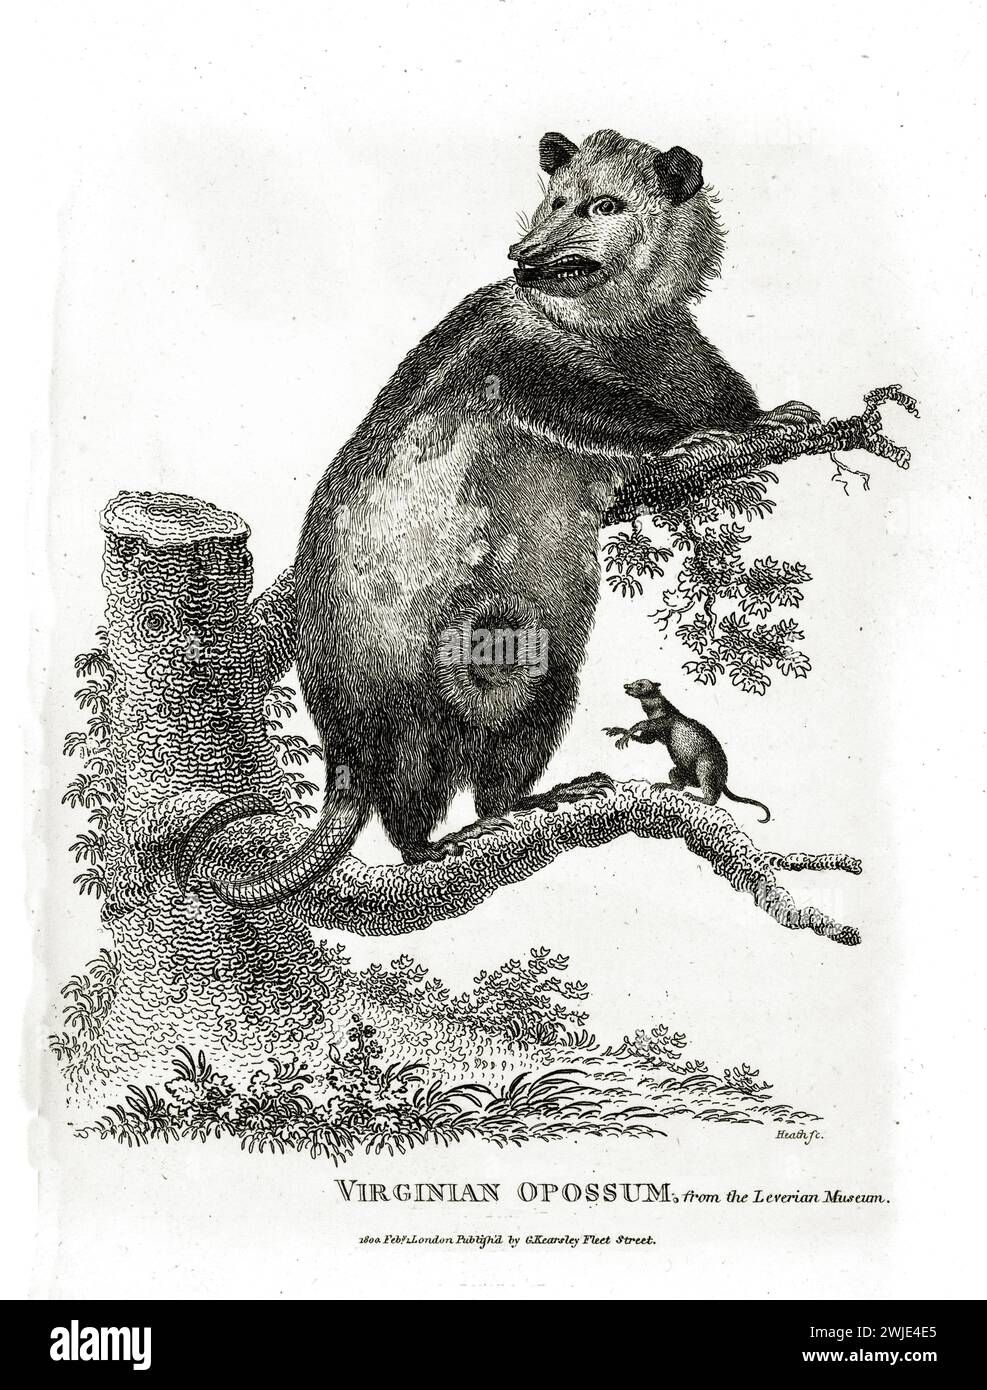 Old engraved illustration of Virginian Opossum and his cub. Created by George Shaw, published in Zoological Lectures, London, 1809. Stock Photo